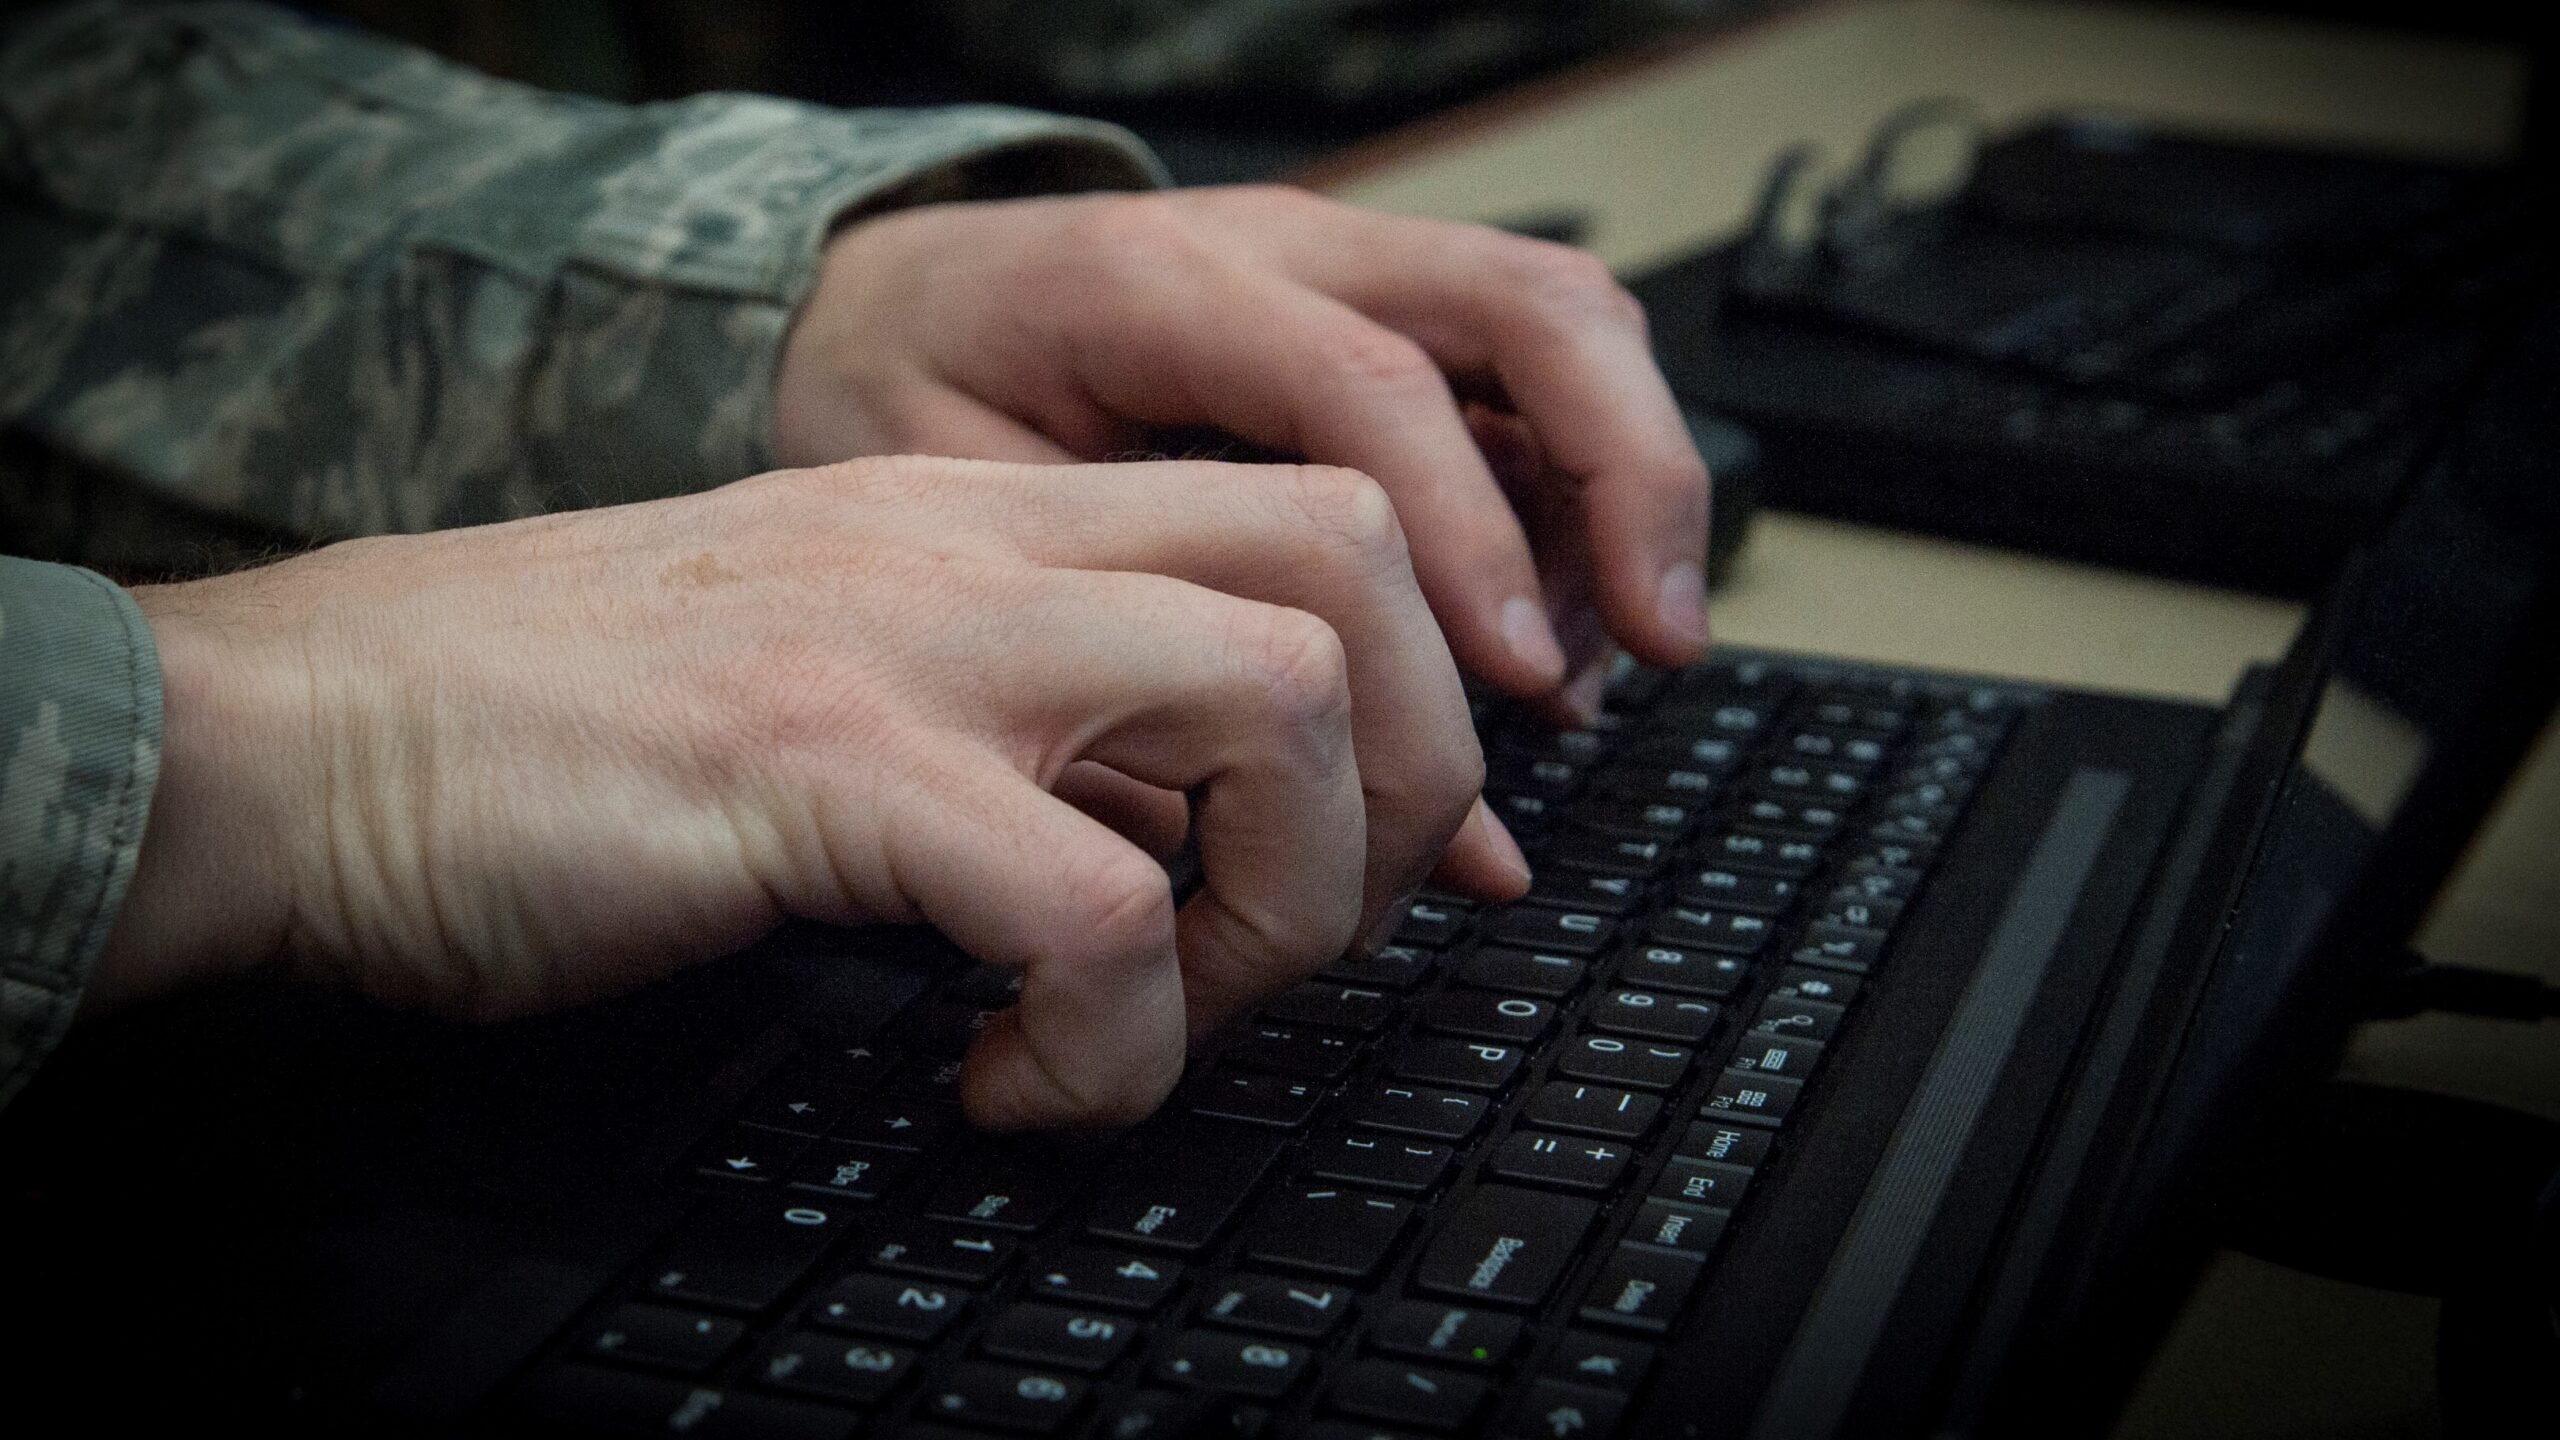 Military cyber typing computer